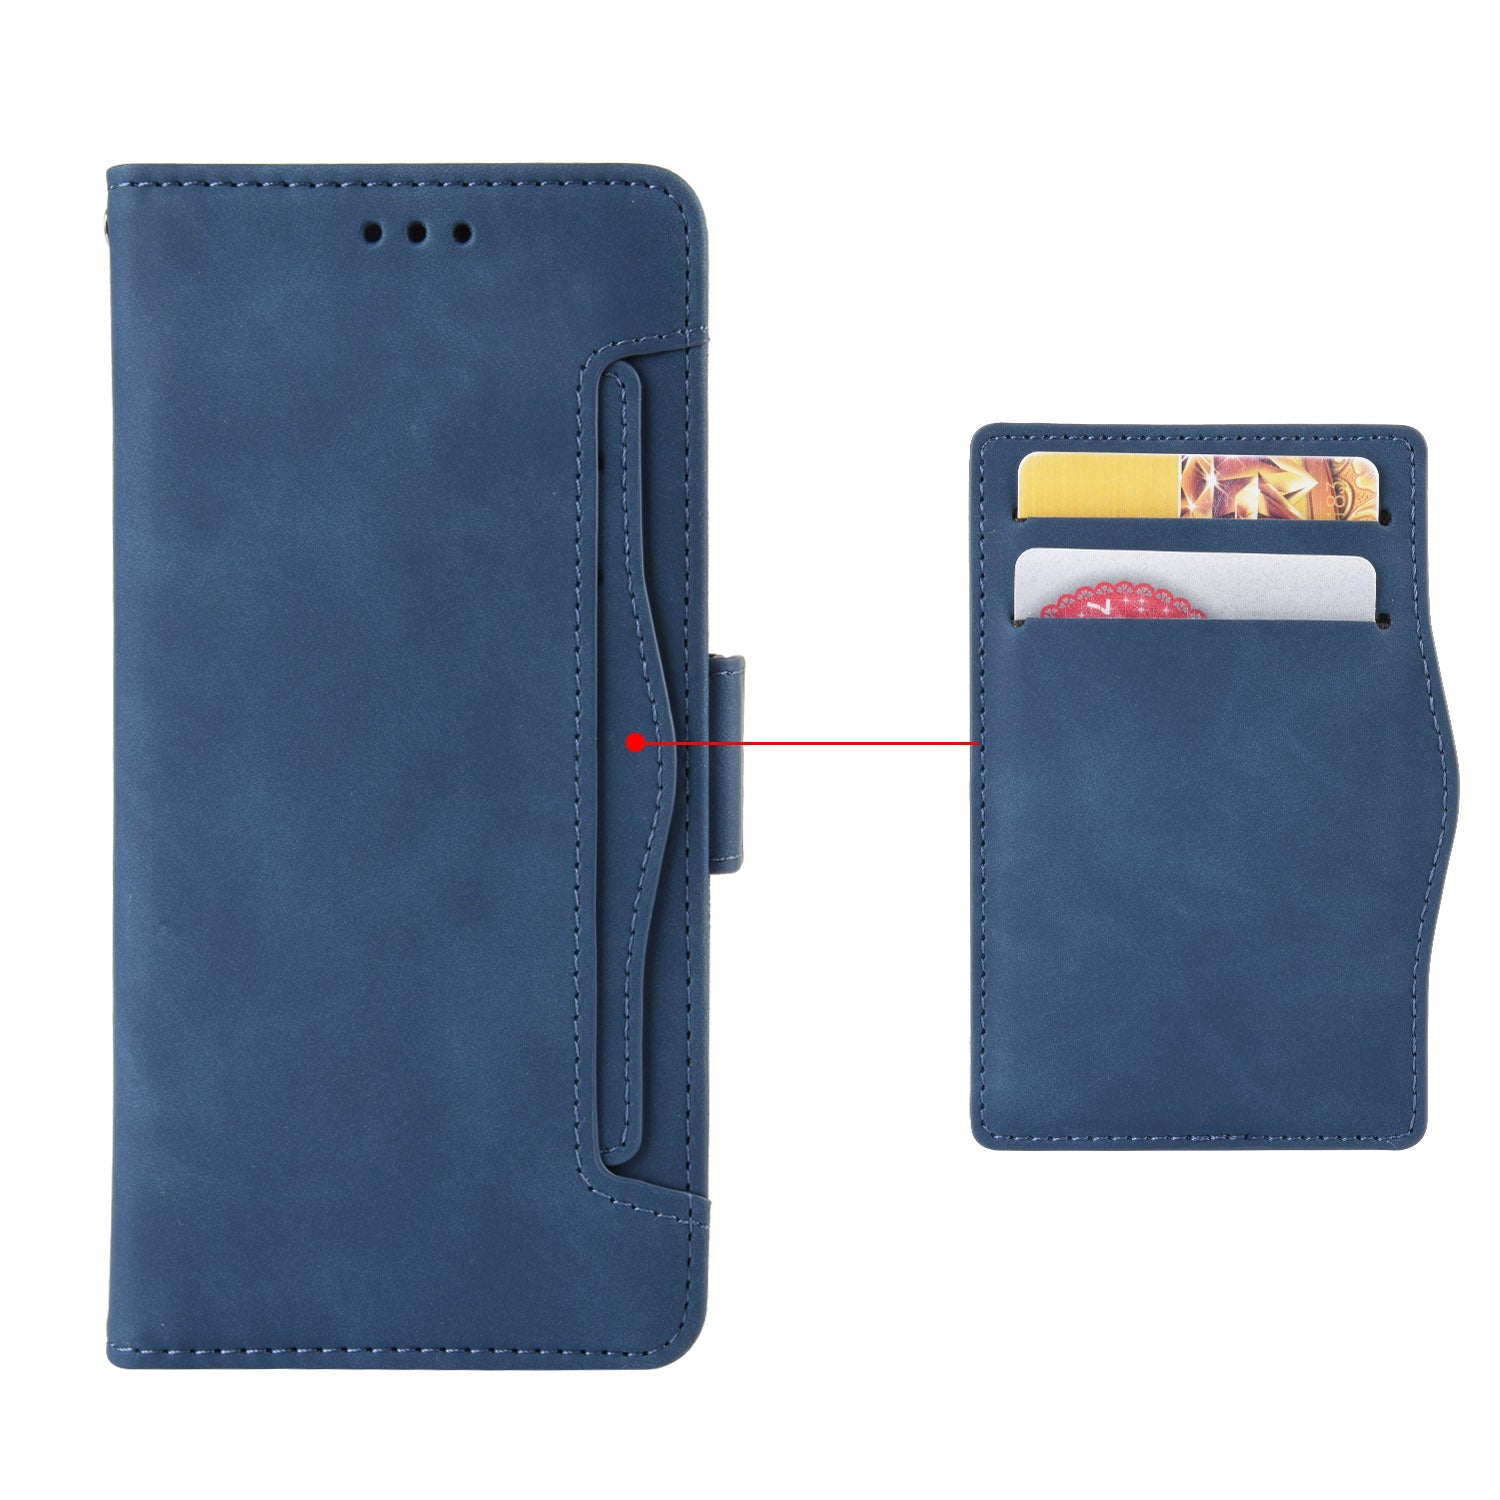 For Huawei Pura 70 Leather Case Multiple Card Slots Mobile Phone Cover Wholesale - Blue